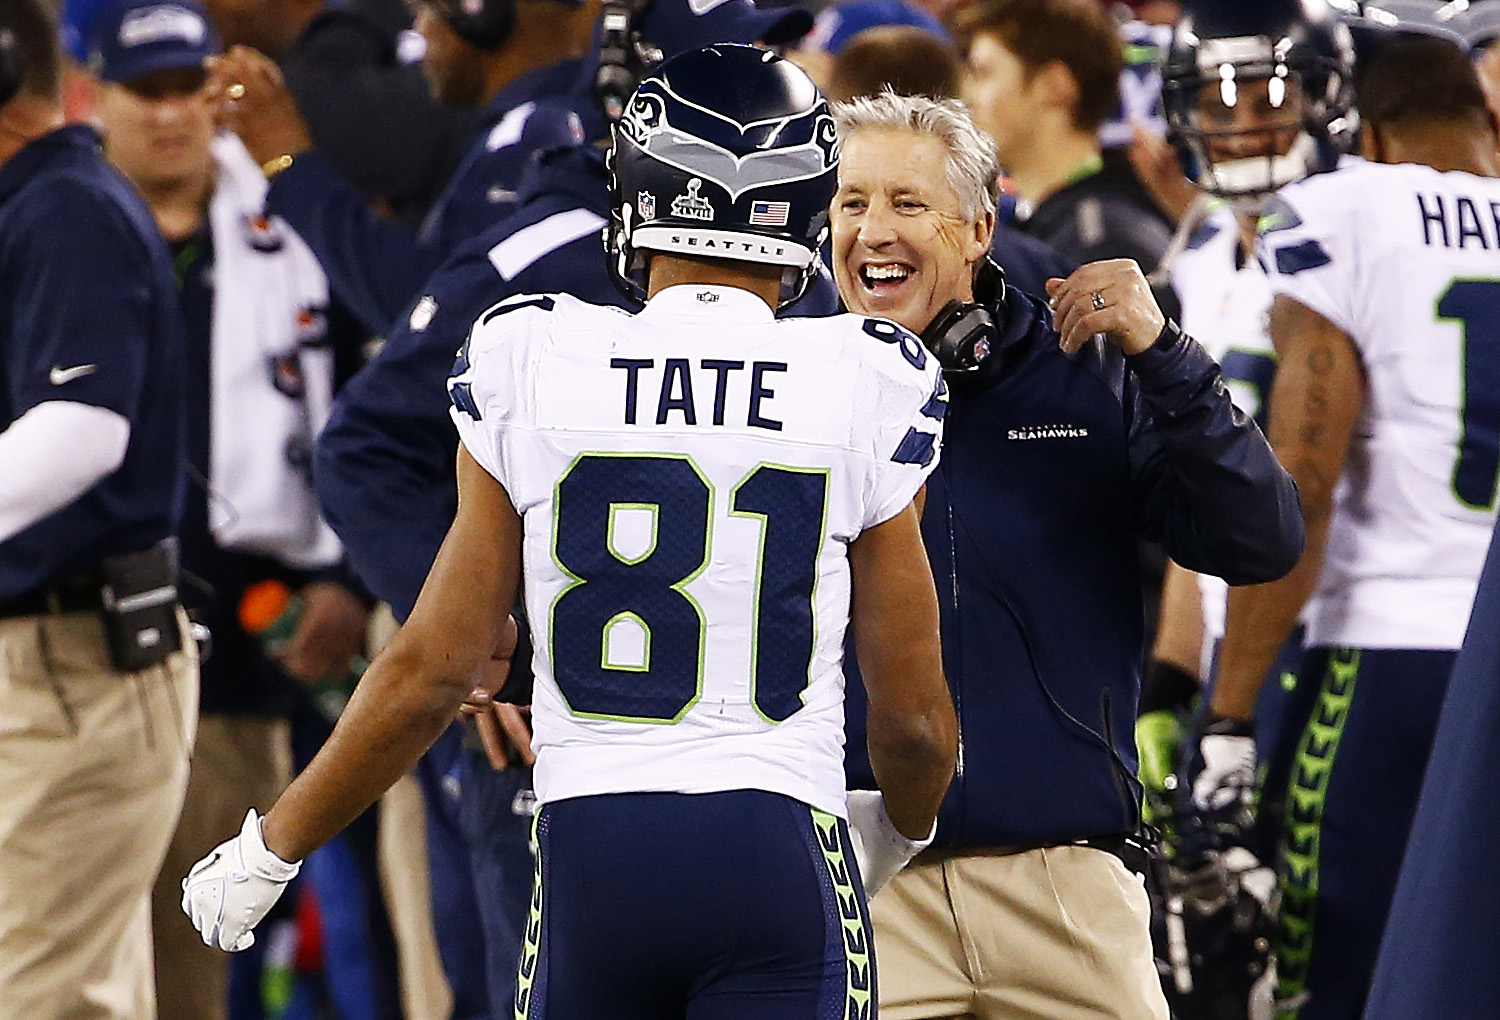 Pete Carroll celebrates with wide receiver Golden Tate after Super Bowl XLVIII at MetLife Stadium on February 2, 2014 in East Rutherford, New Jersey